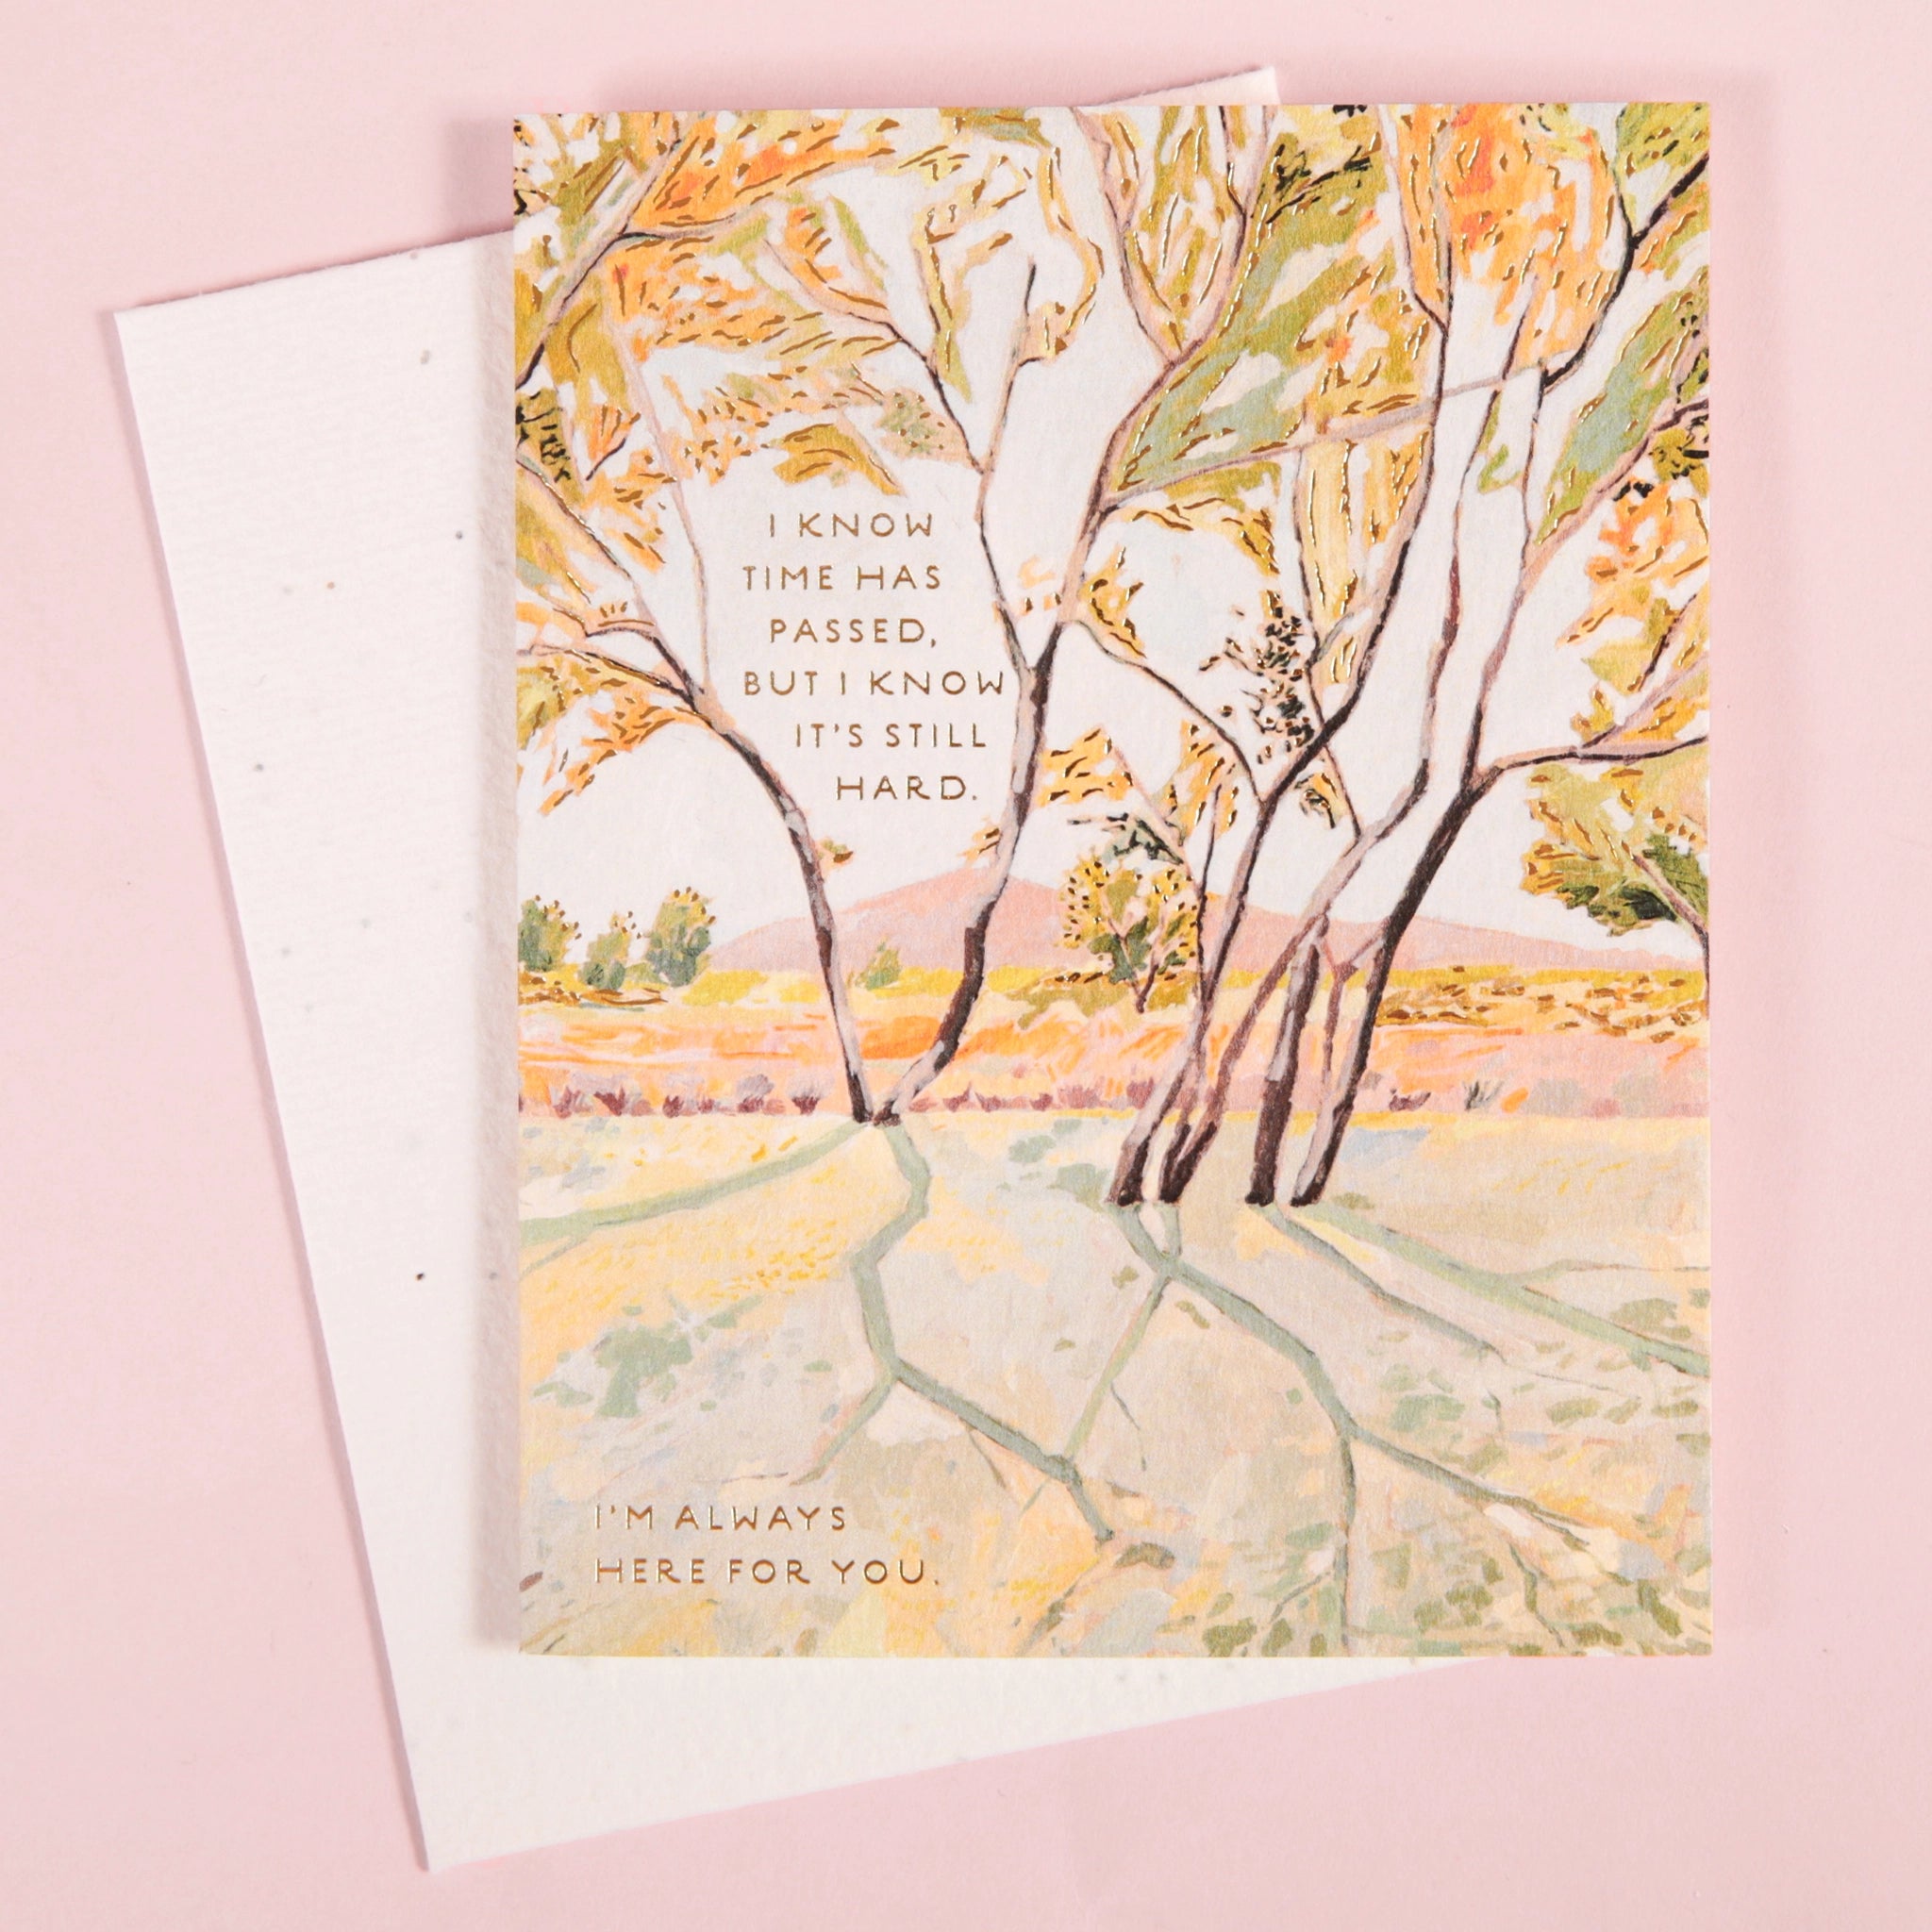 On a light pink background is a white envelope and card with a yellow and light green illustration of trees in a park with text that reads, &quot;I know time has passed, but I know it&#39;s still hard. I&#39;m always here for you&quot;.